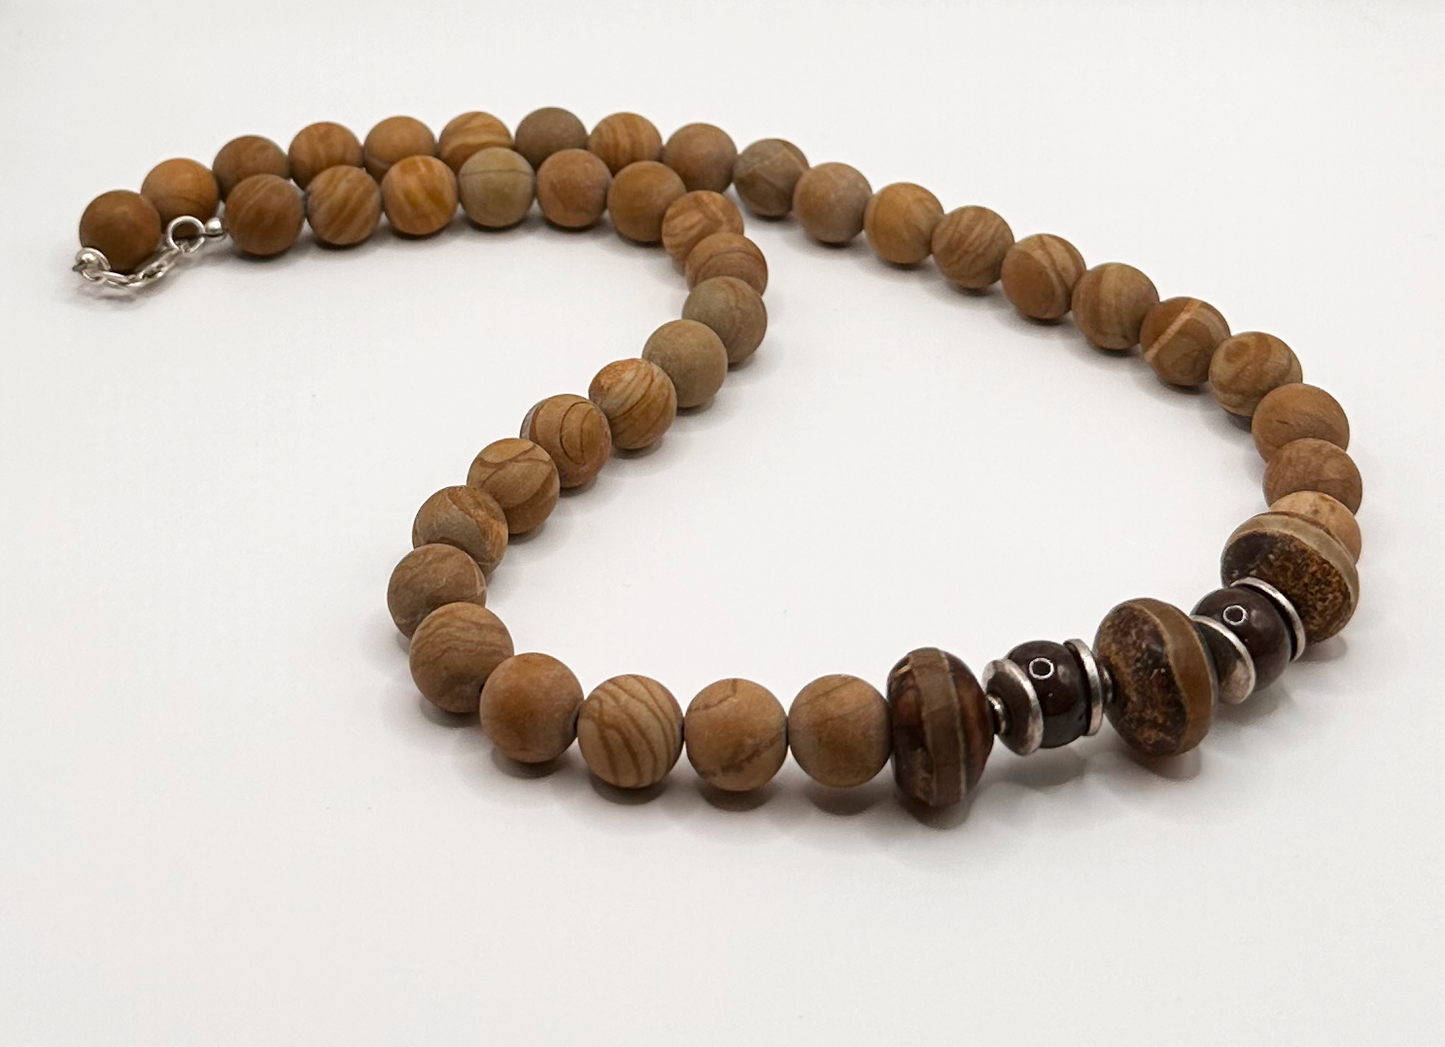 Natural Sandlewood Beads with Tibetan Accent Beads Necklace